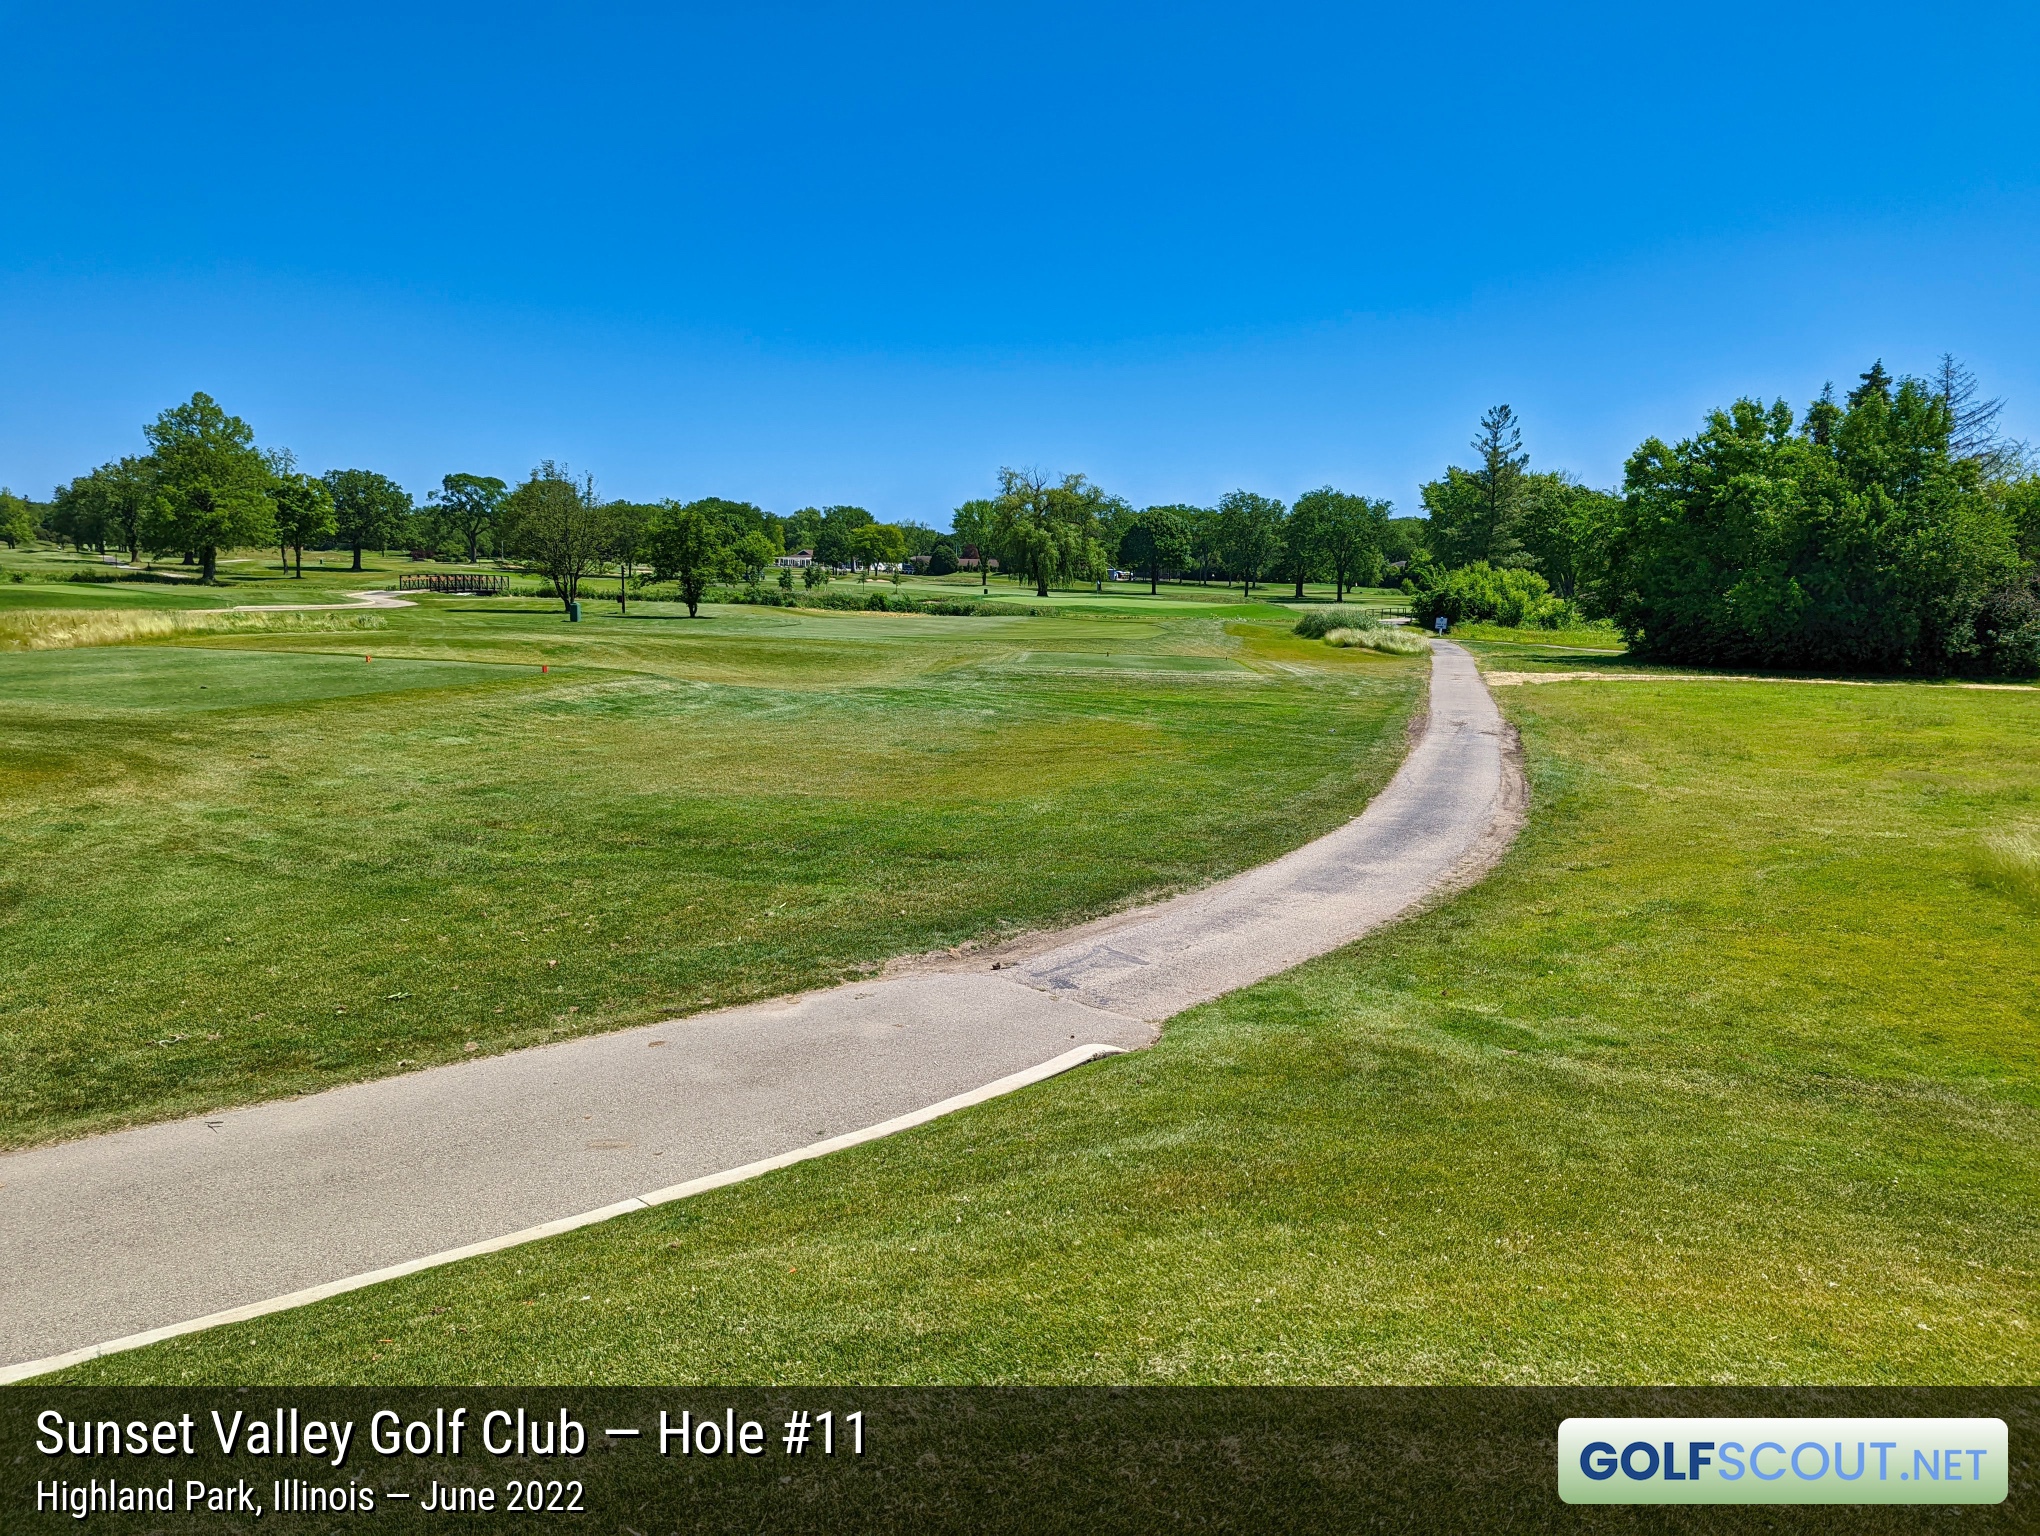 Photo of hole #11 at Sunset Valley Golf Club in Highland Park, Illinois. 